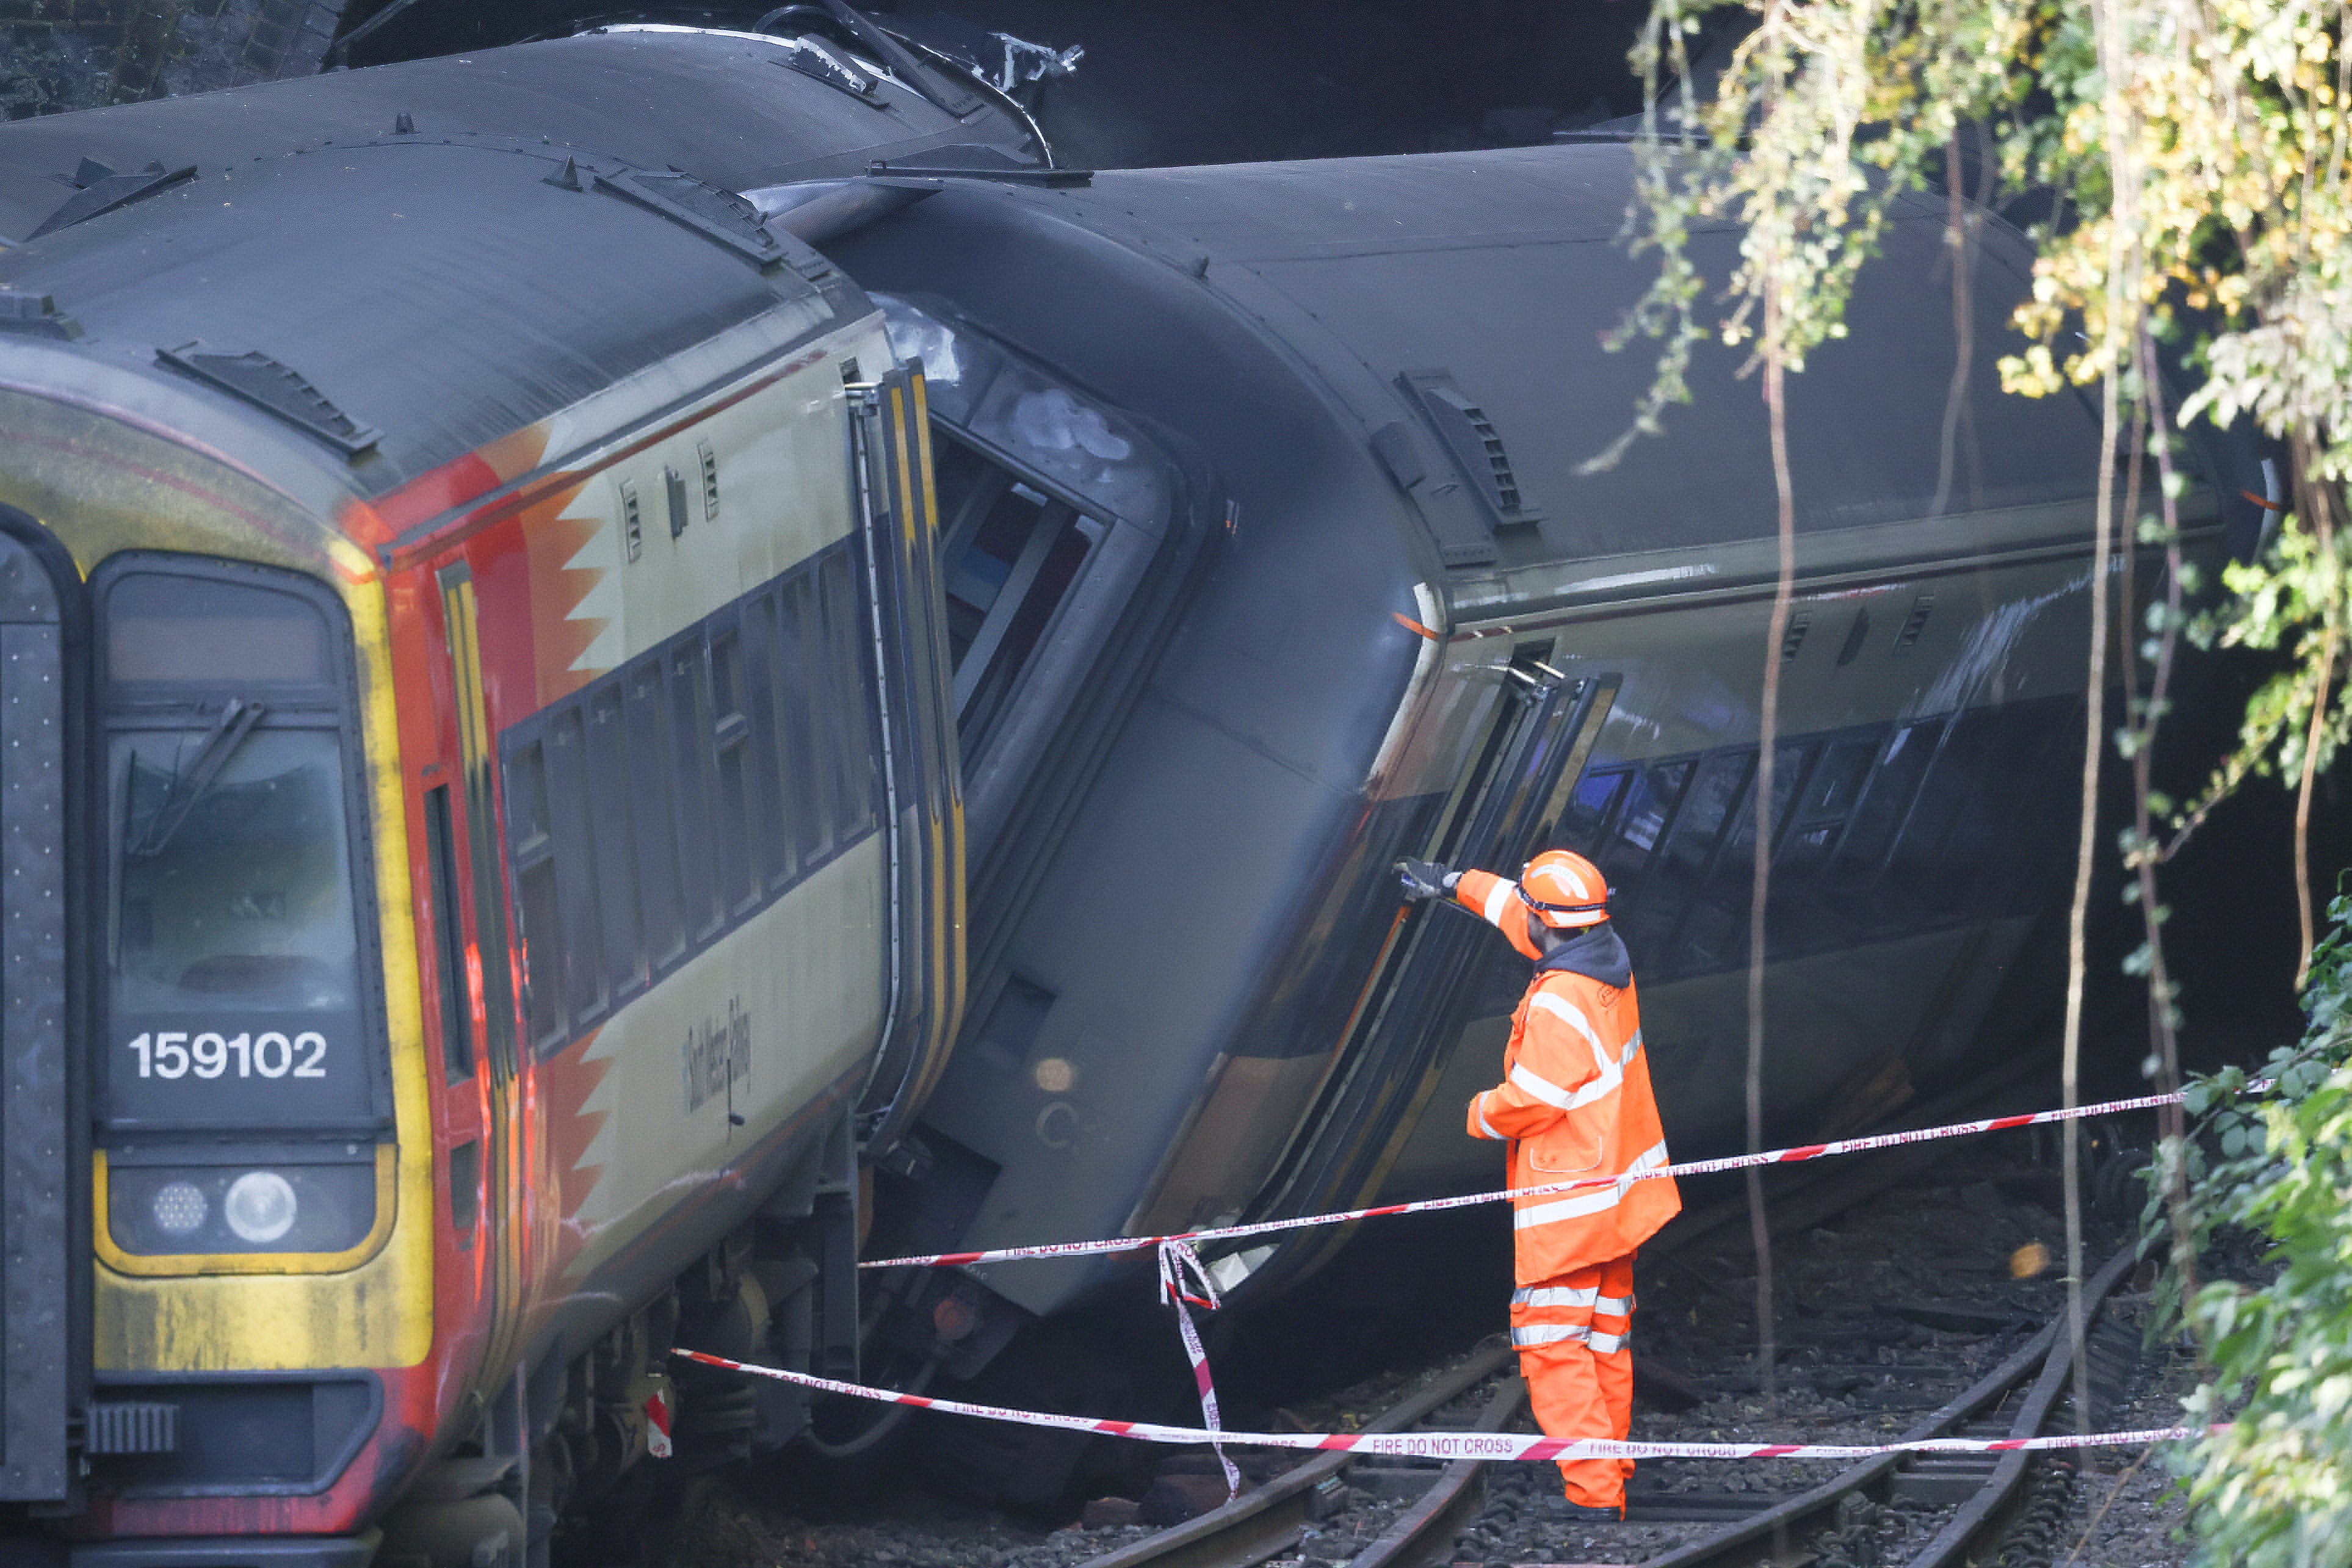 A South Western train service struck a Great Western train “at an angle such that both trains derailed and ran alongside each other into the tunnel”, investigators said